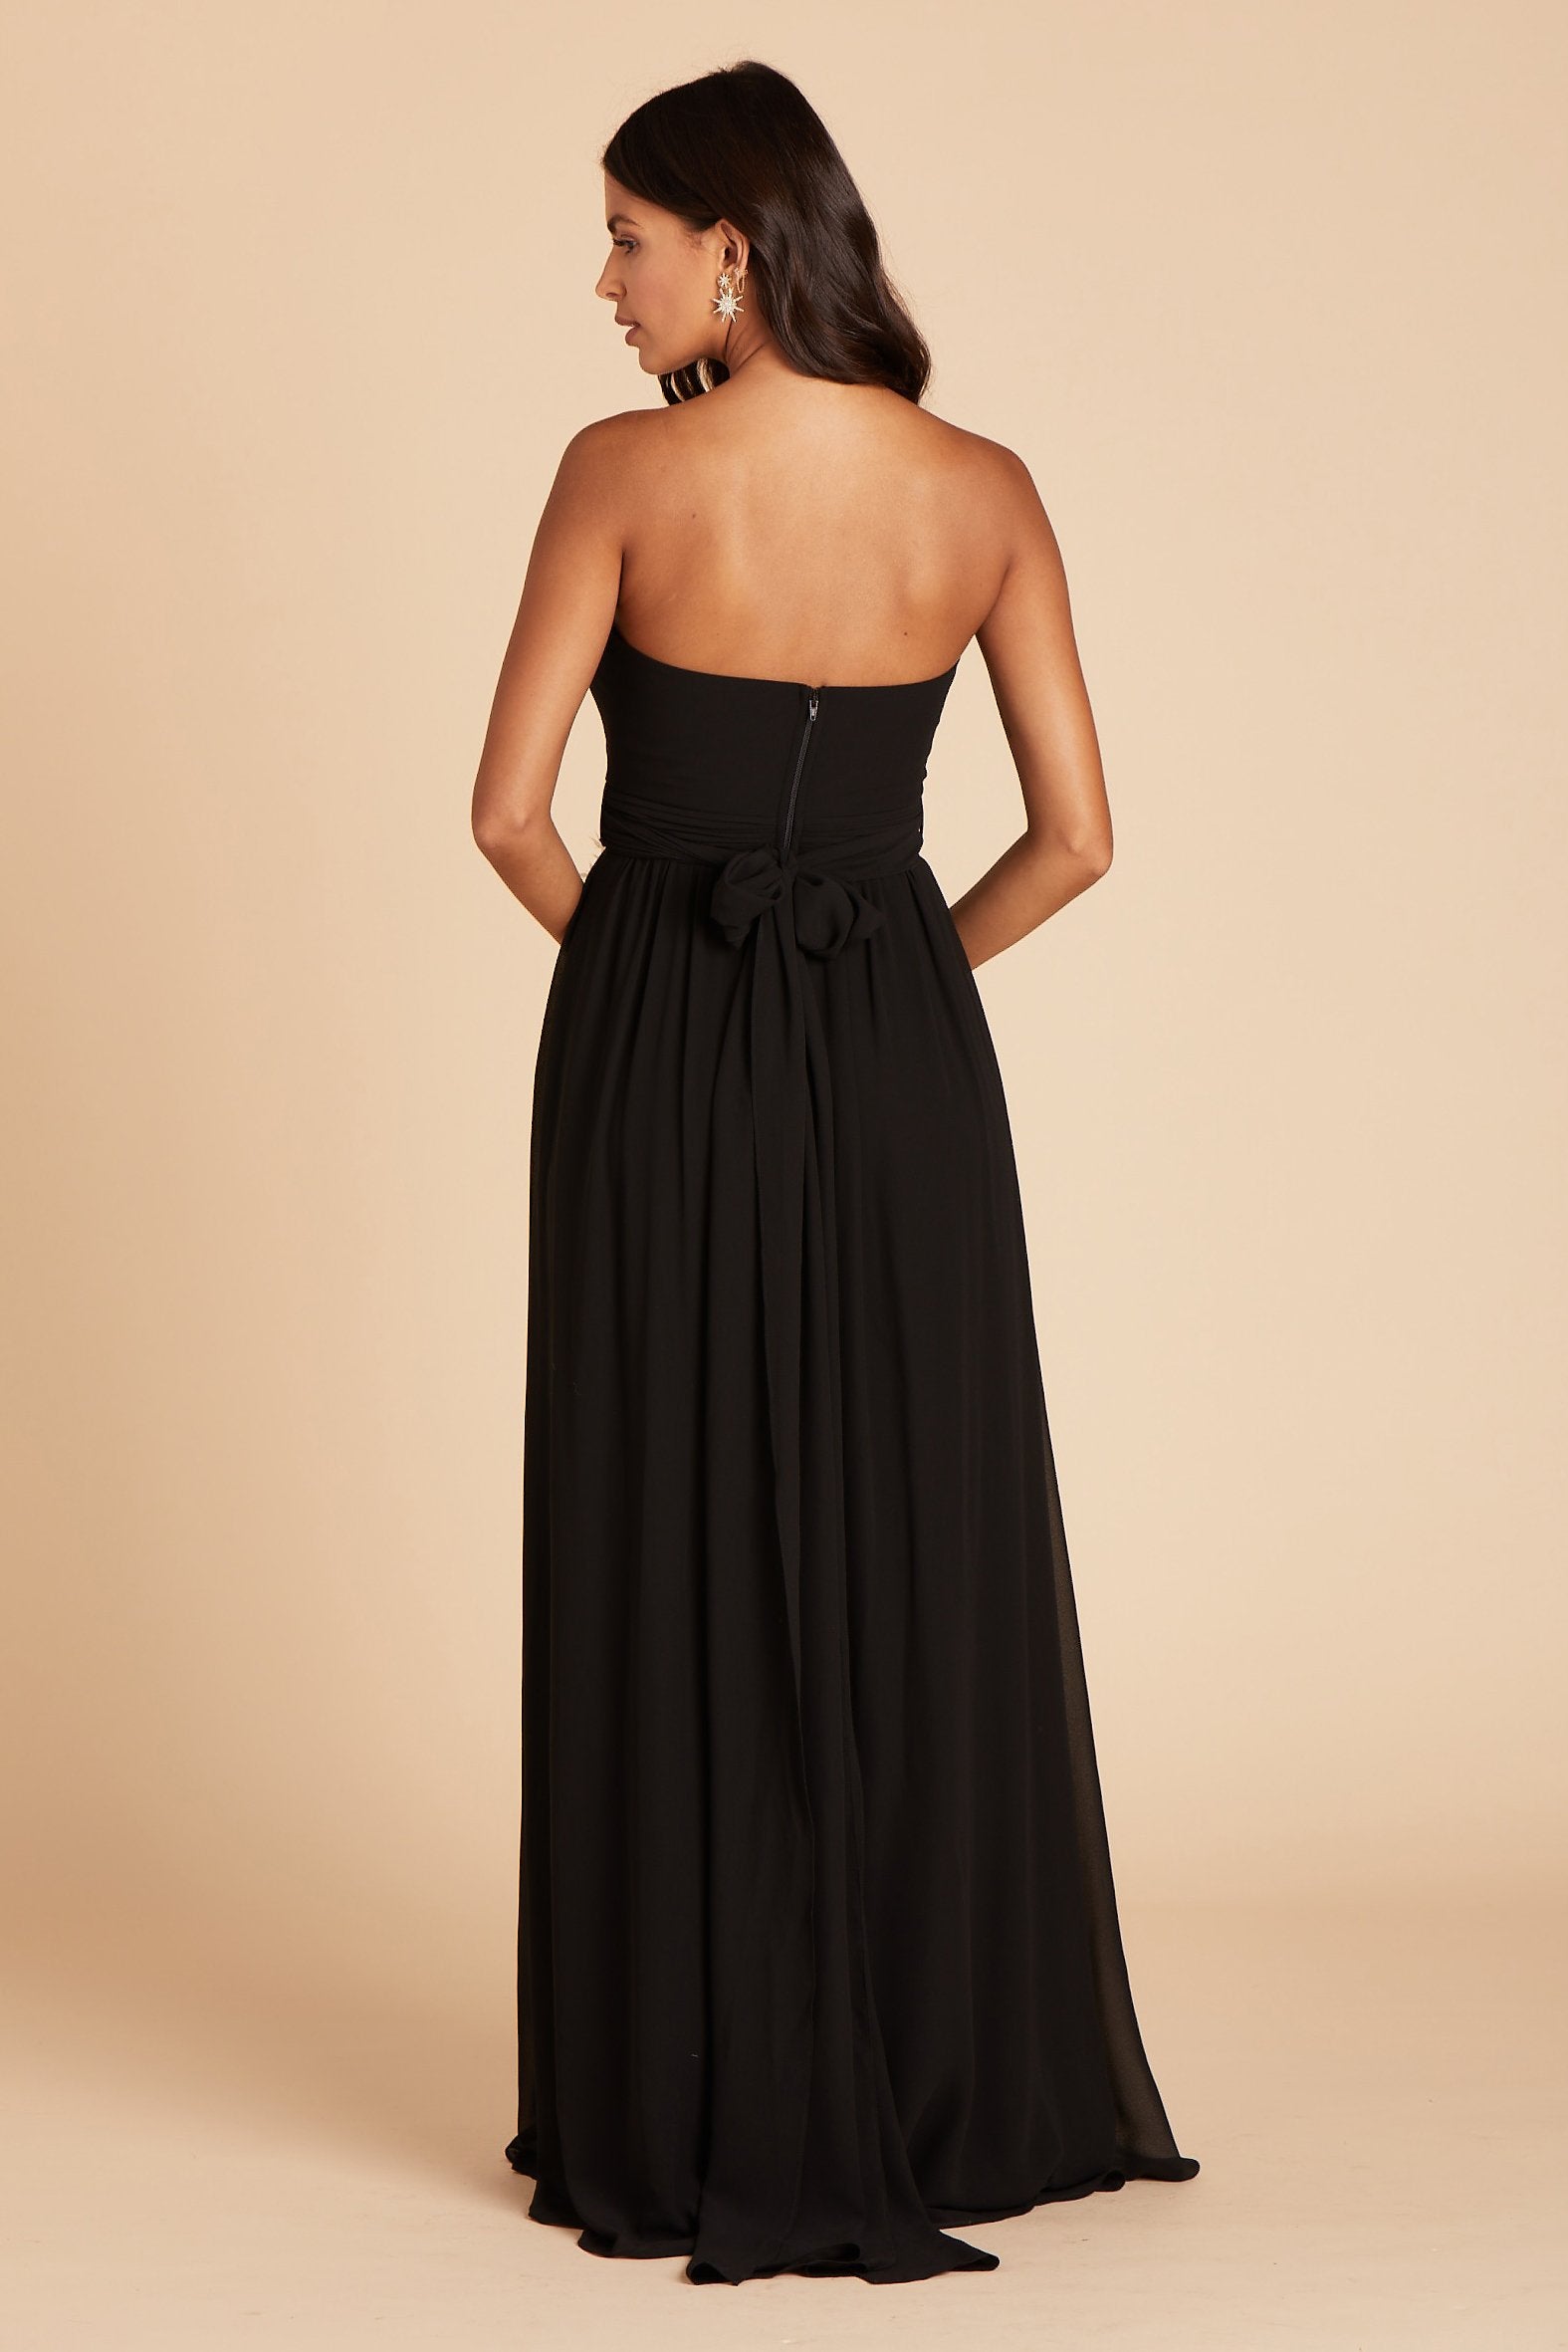 Grace convertible bridesmaid dress in black chiffon by Birdy Grey, back view